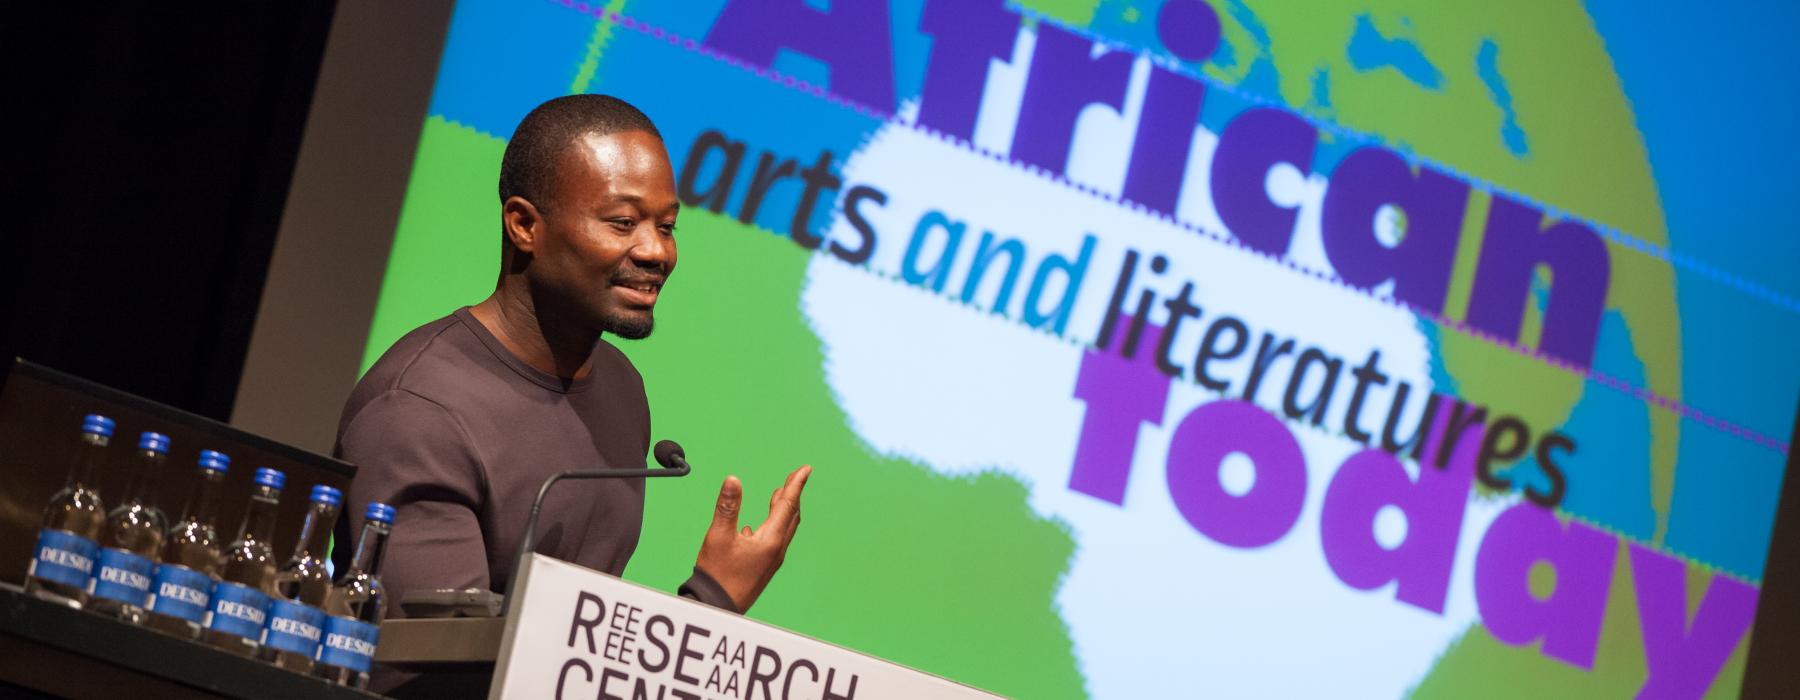 African Arts & Literatures Today: New Media, Popular Culture and Anthropology | Research Center for Material Culture